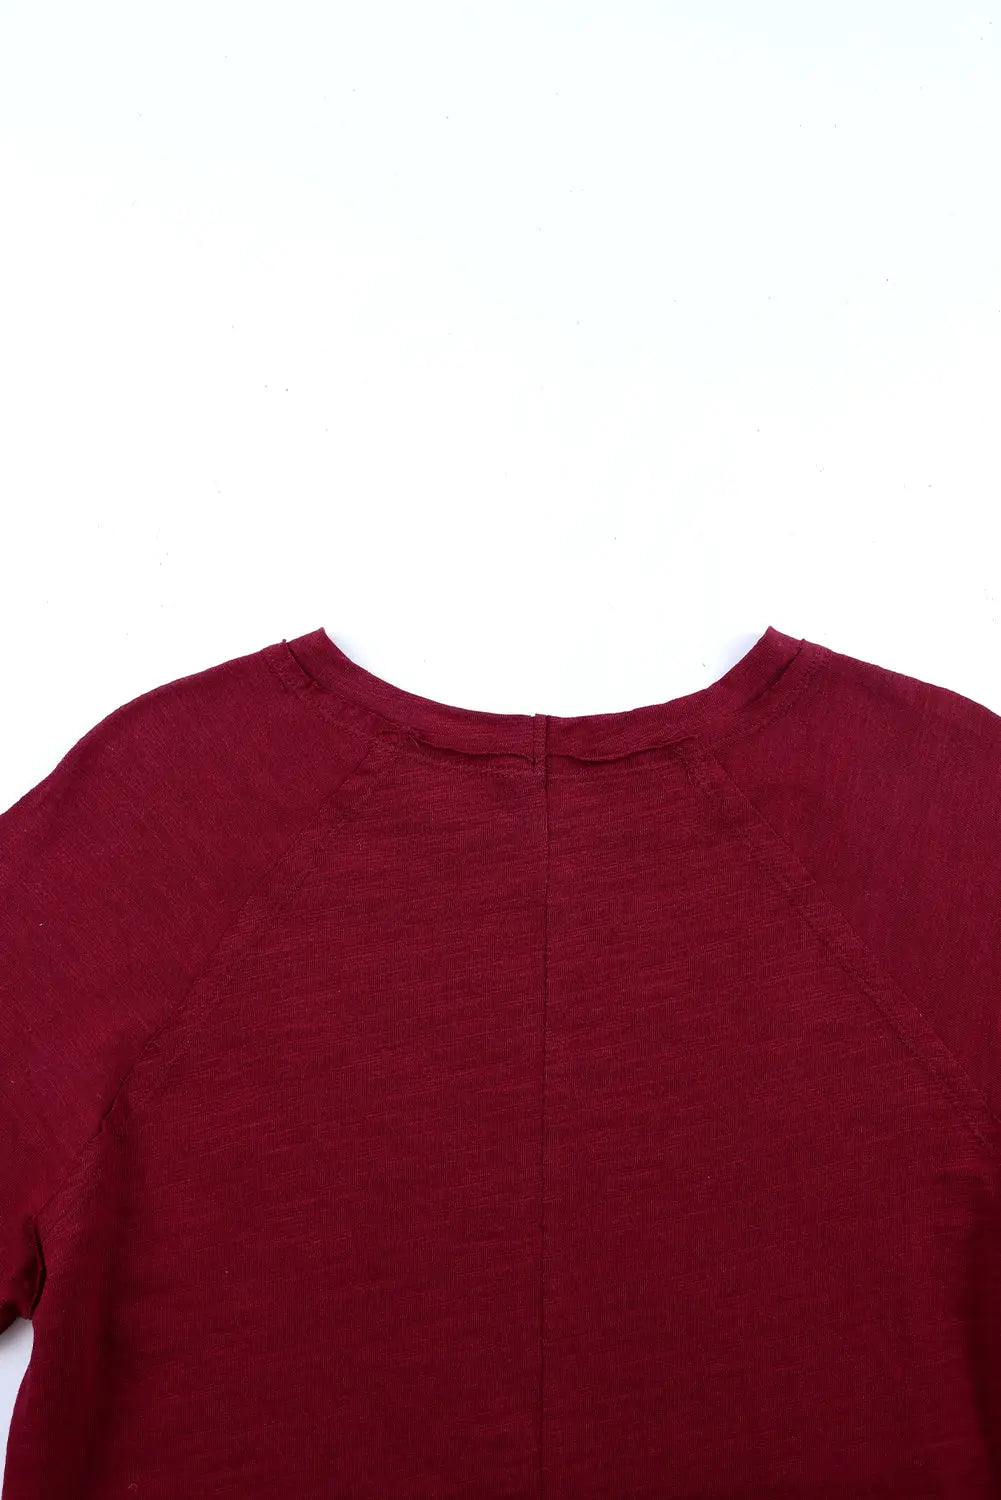 Red solid crew neck long sleeve top - tops